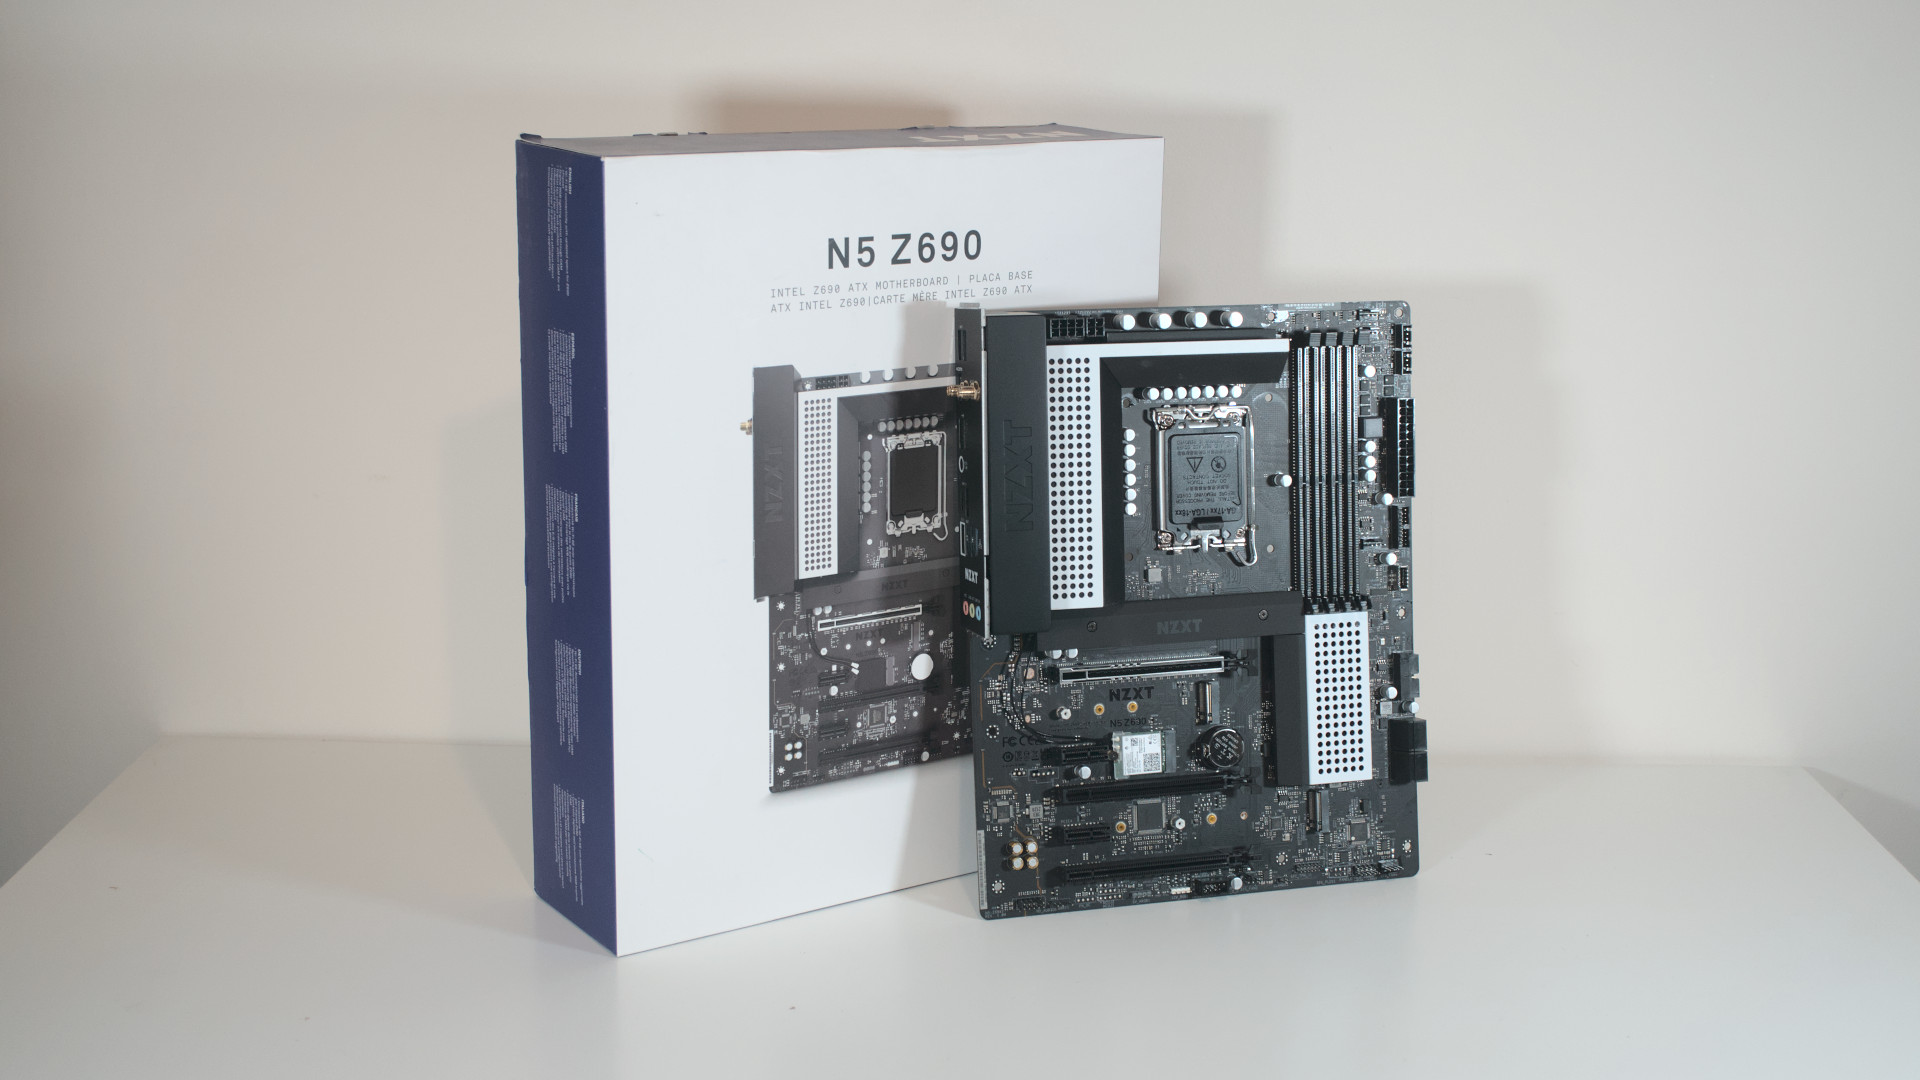 NZXT N5 Z690 review: A solid Intel Alder Lake motherboard with NZXT CAM  support